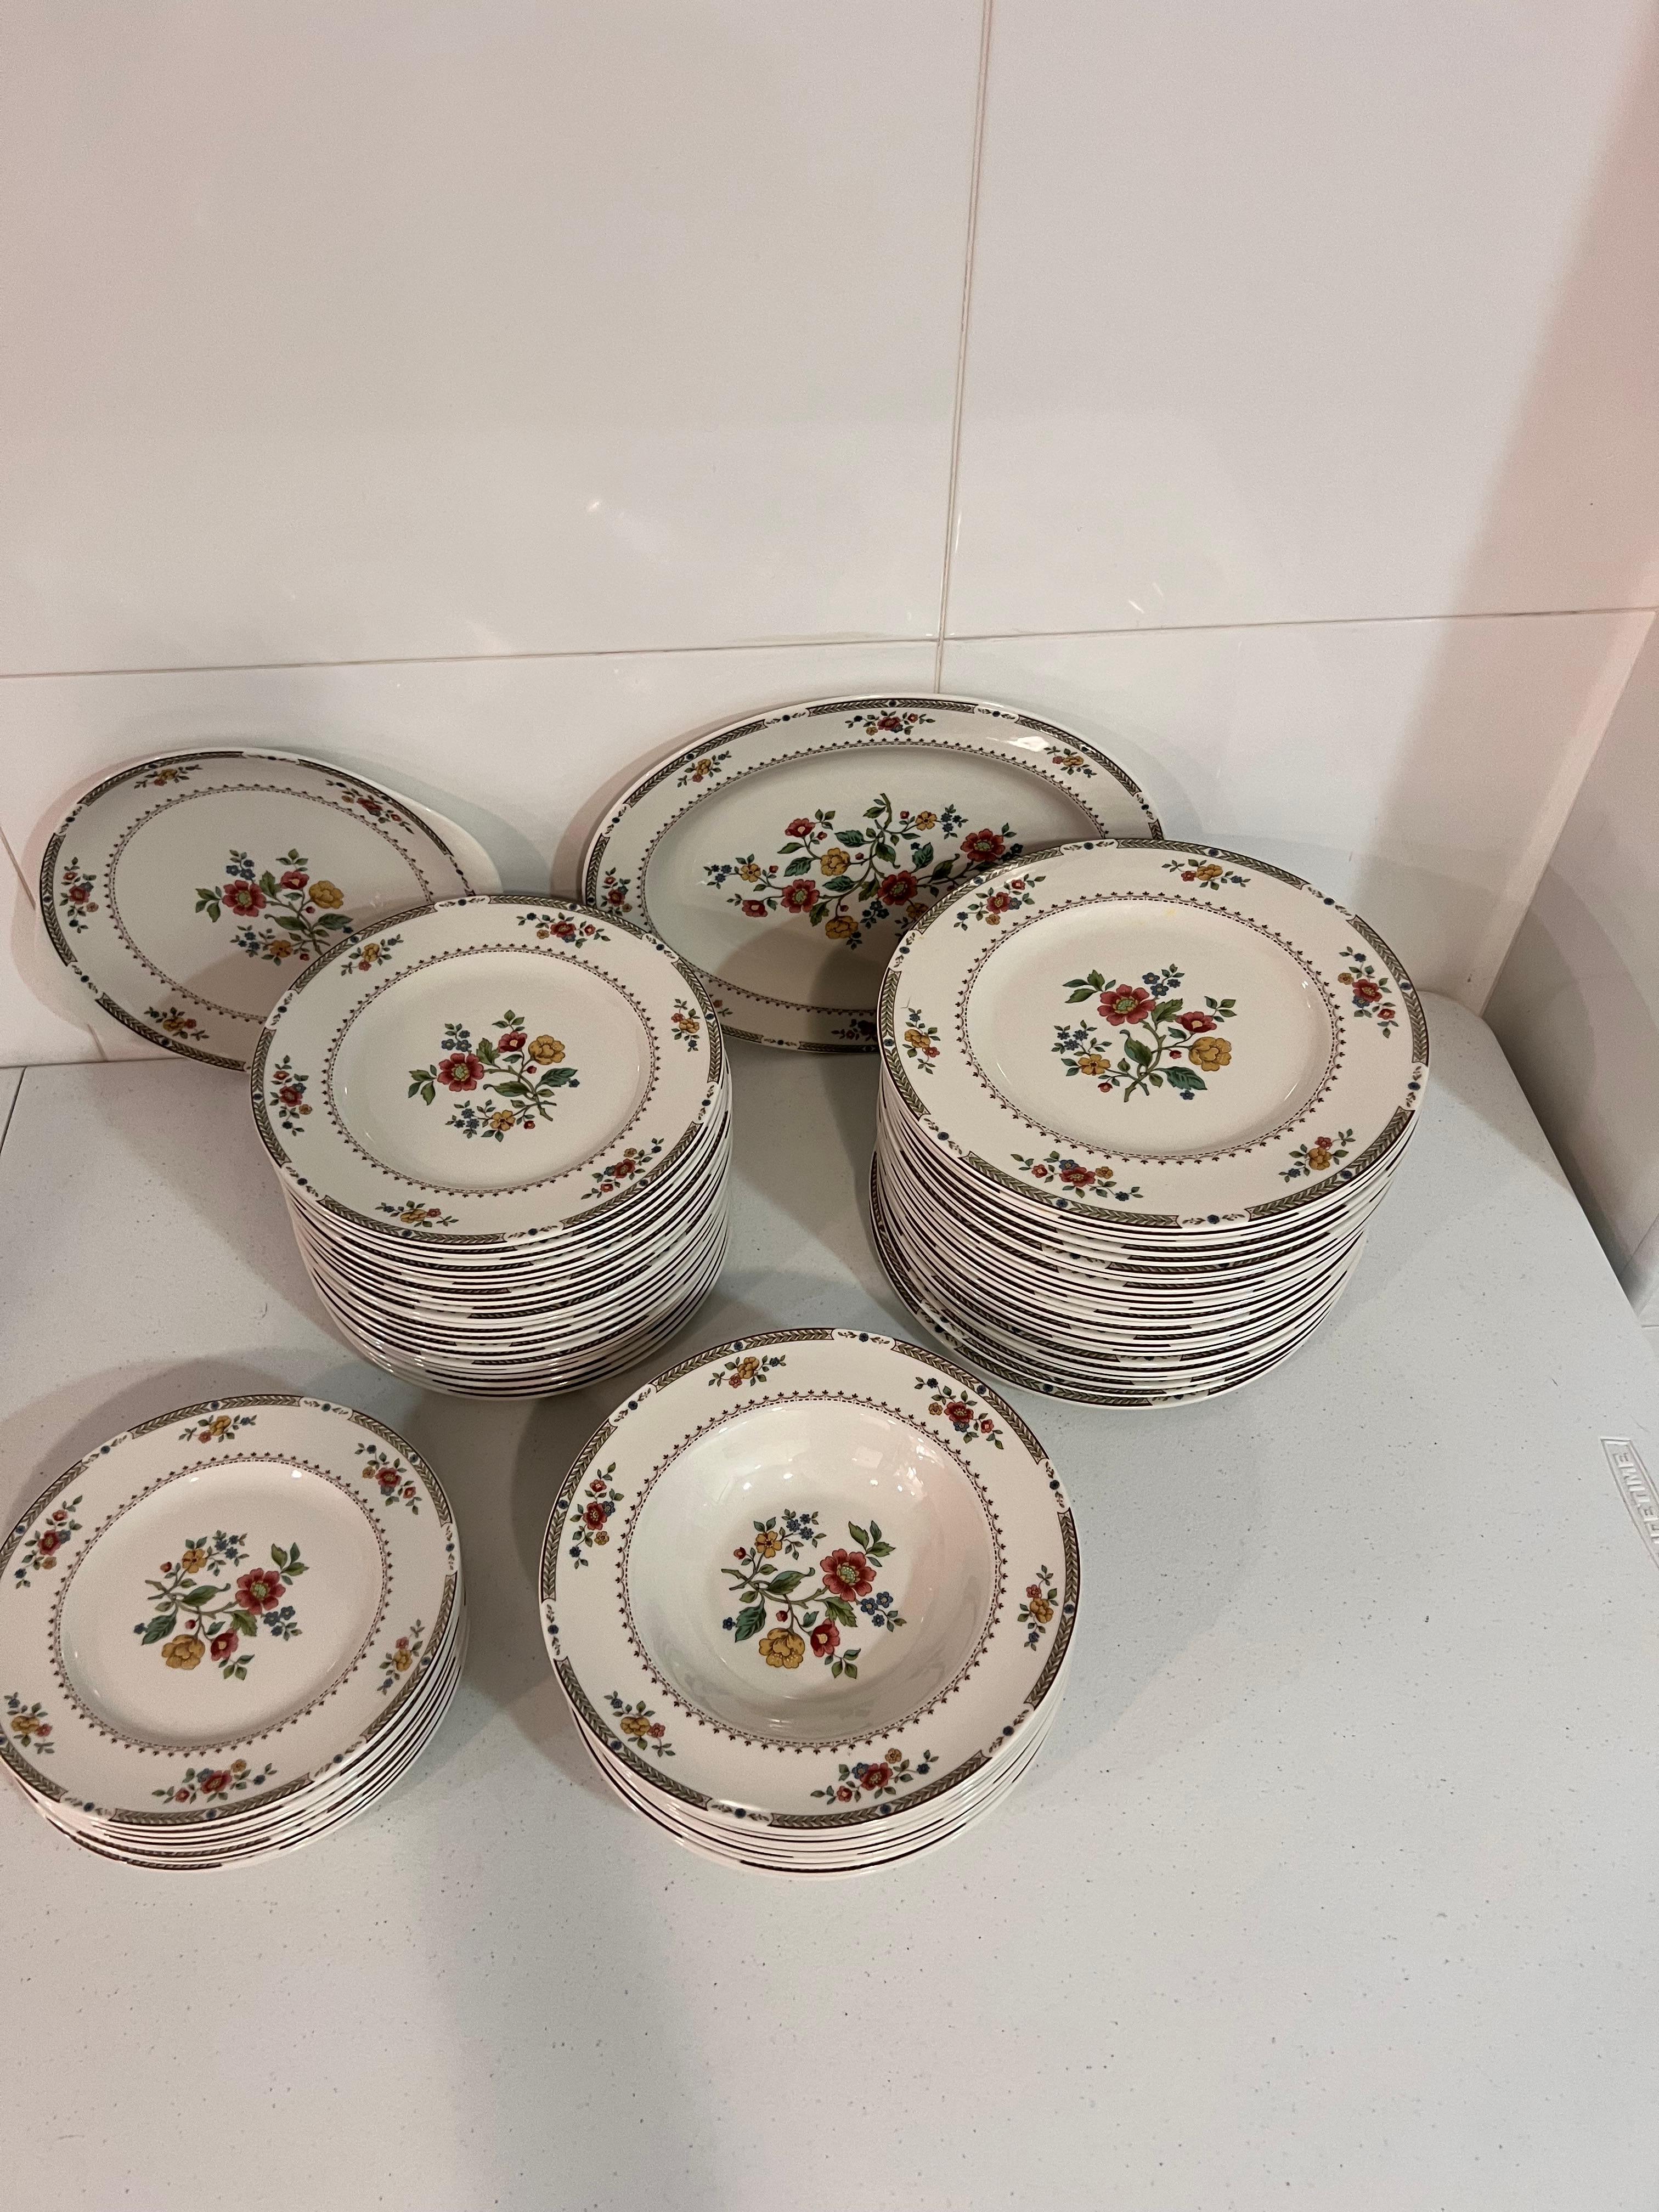 Hand-Painted Footed Cream Soup Bowl &Saucer Replacement Royal Doulton Kingswood Floral Design For Sale